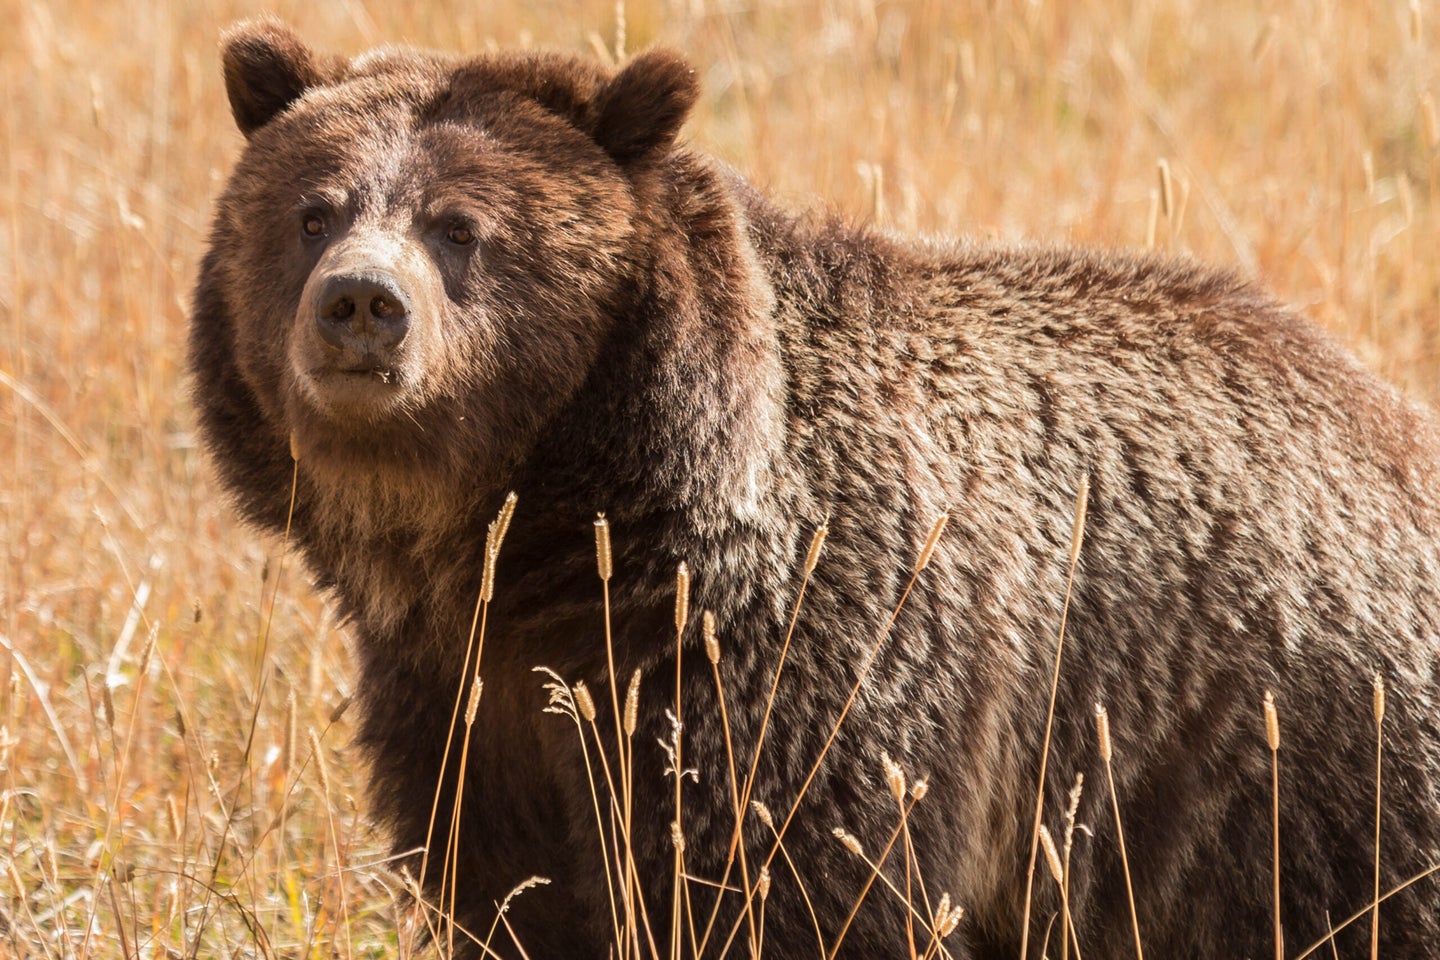 There are an estimated 1,070 grizzly bears in the Great Yellowstone Ecosystem. 